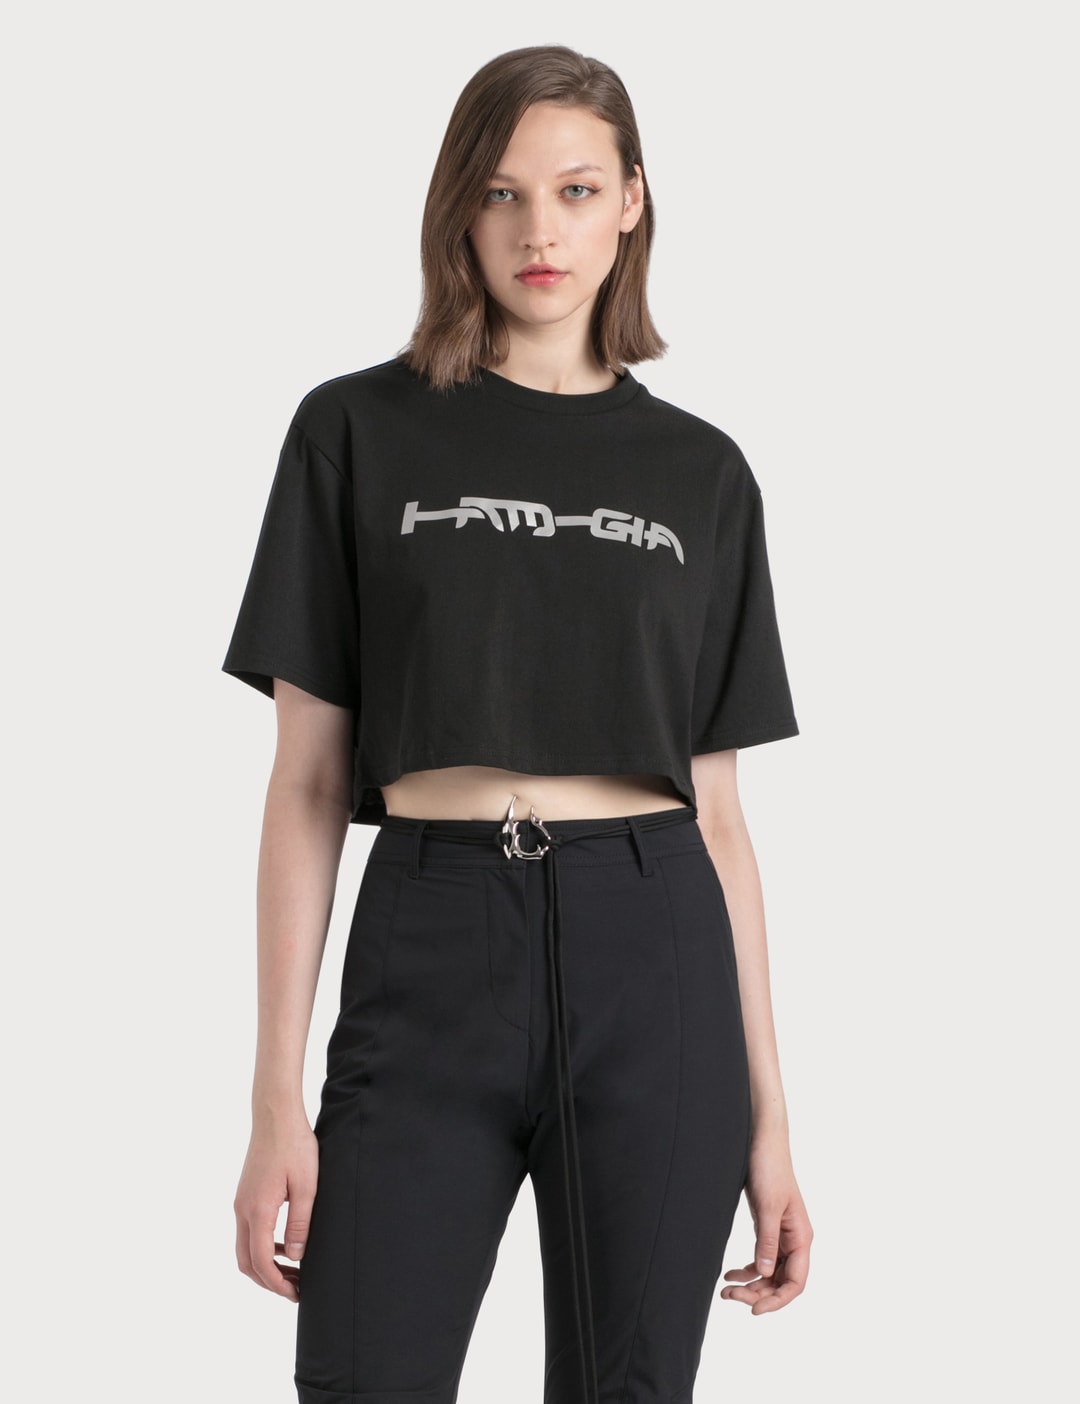 I.AM.GIA - Vesta Cropped T-Shirt | HBX - Globally Curated Fashion and ...